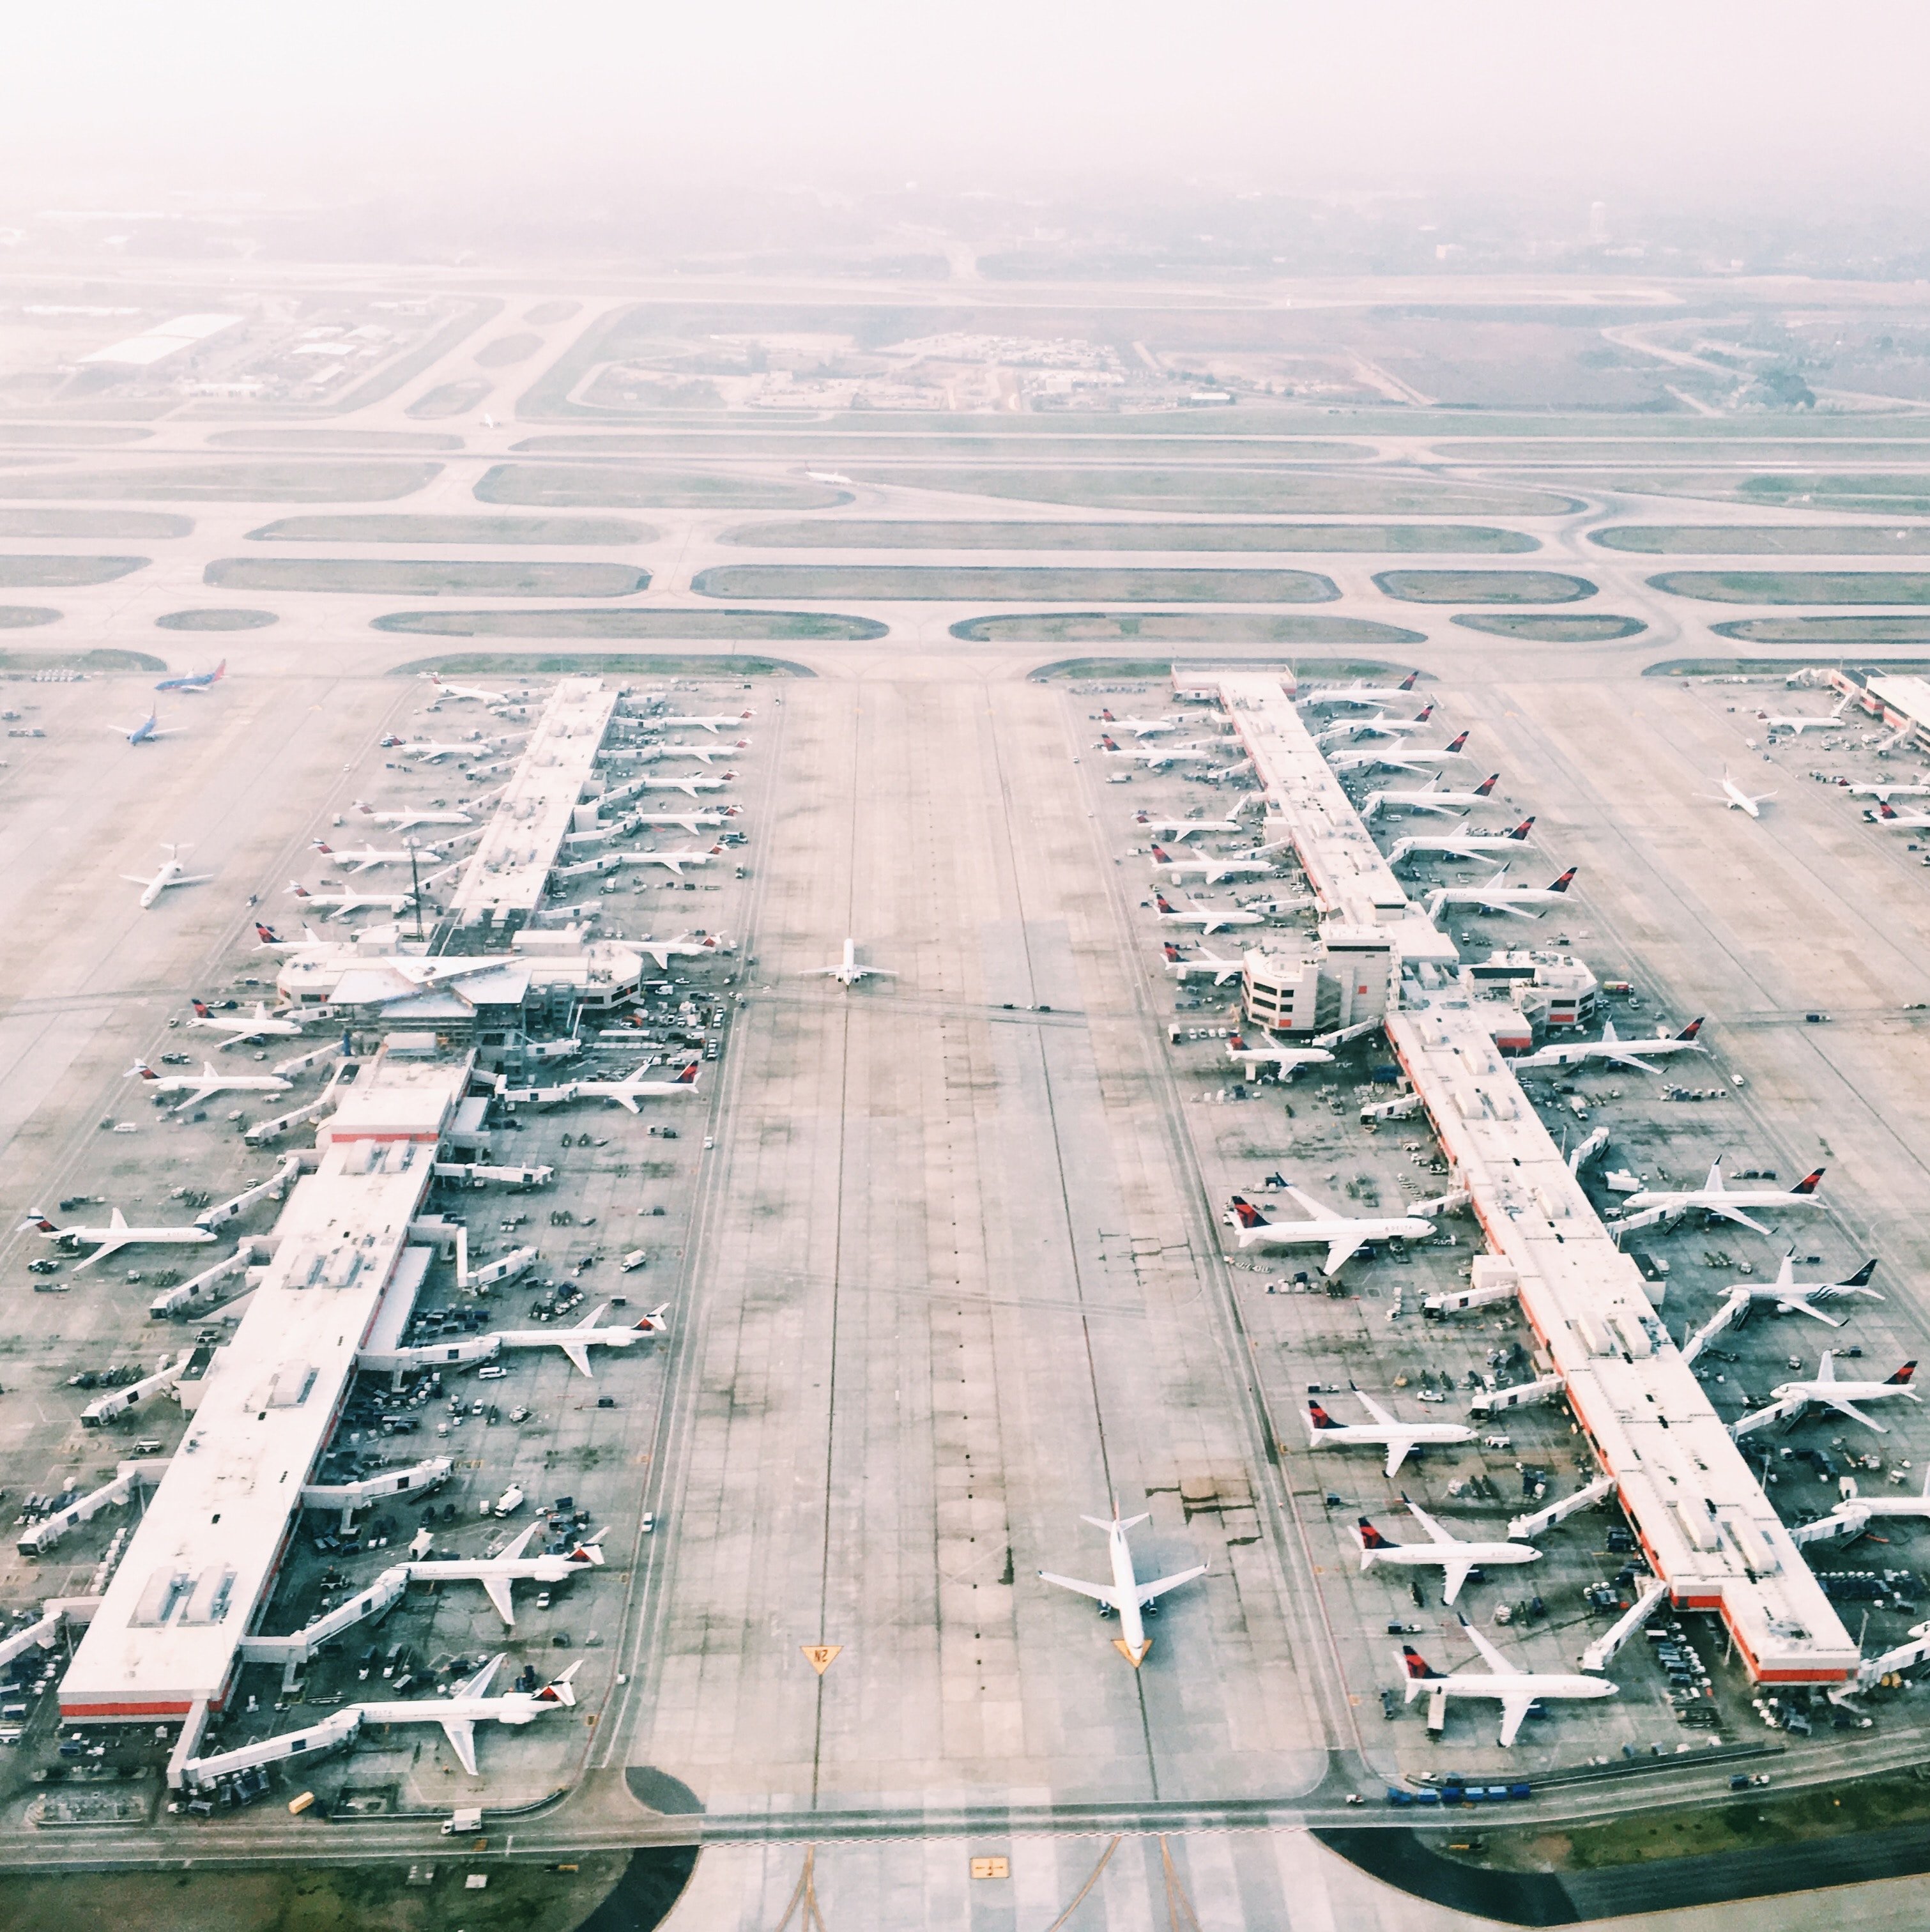 An arial view of an airport | Source: Unsplash.com